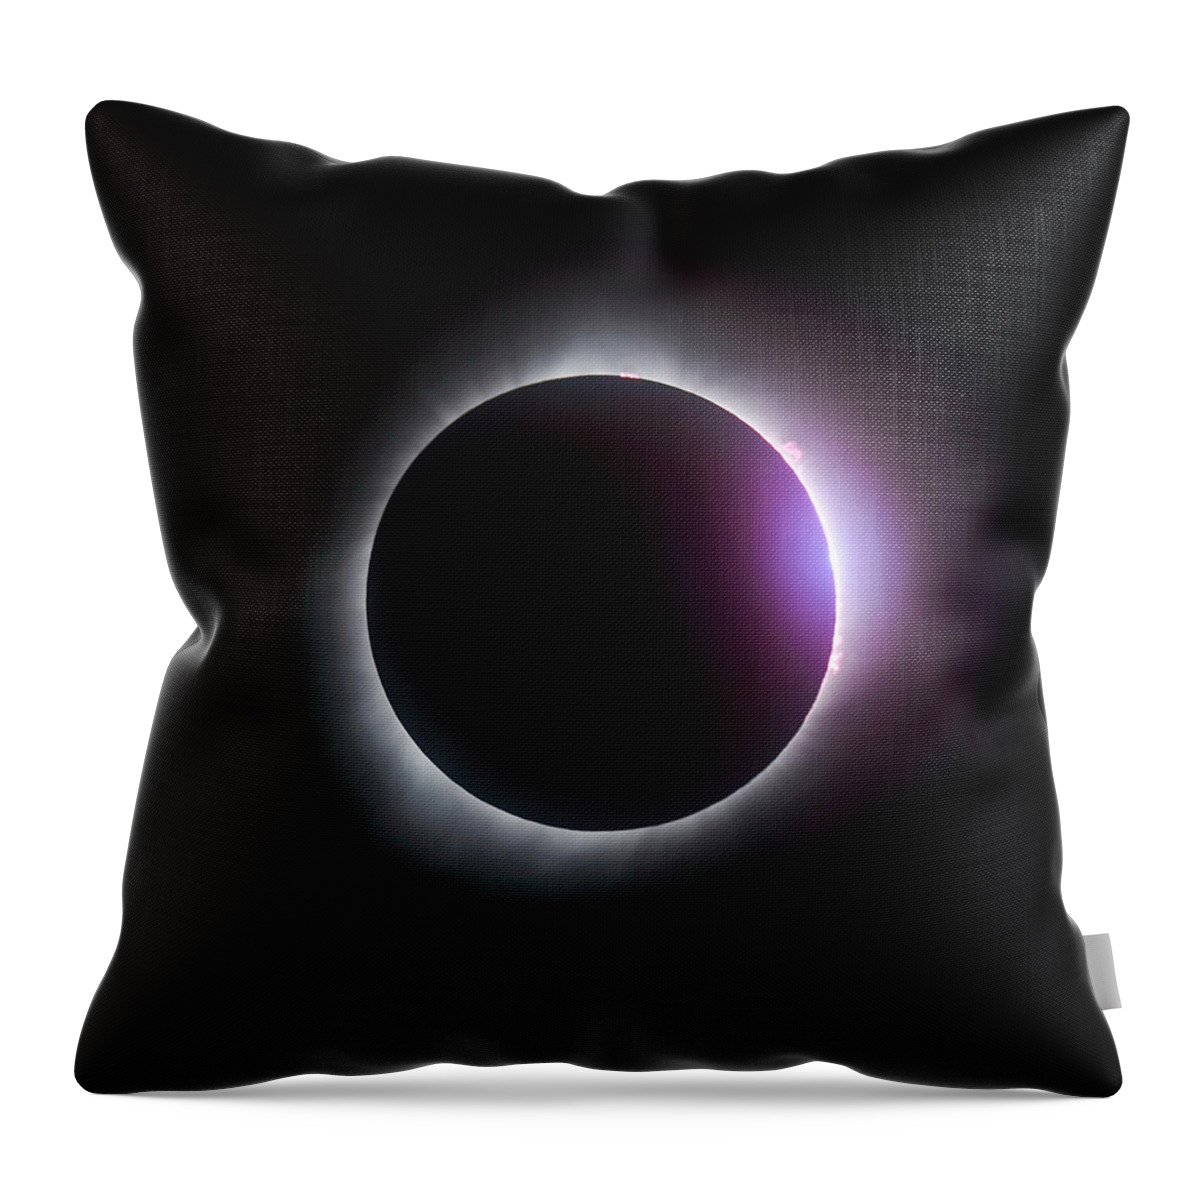 Solar Eclipse Throw Pillow featuring the photograph Just after totality - Solar Eclipse August 21, 2017 by Art Whitton